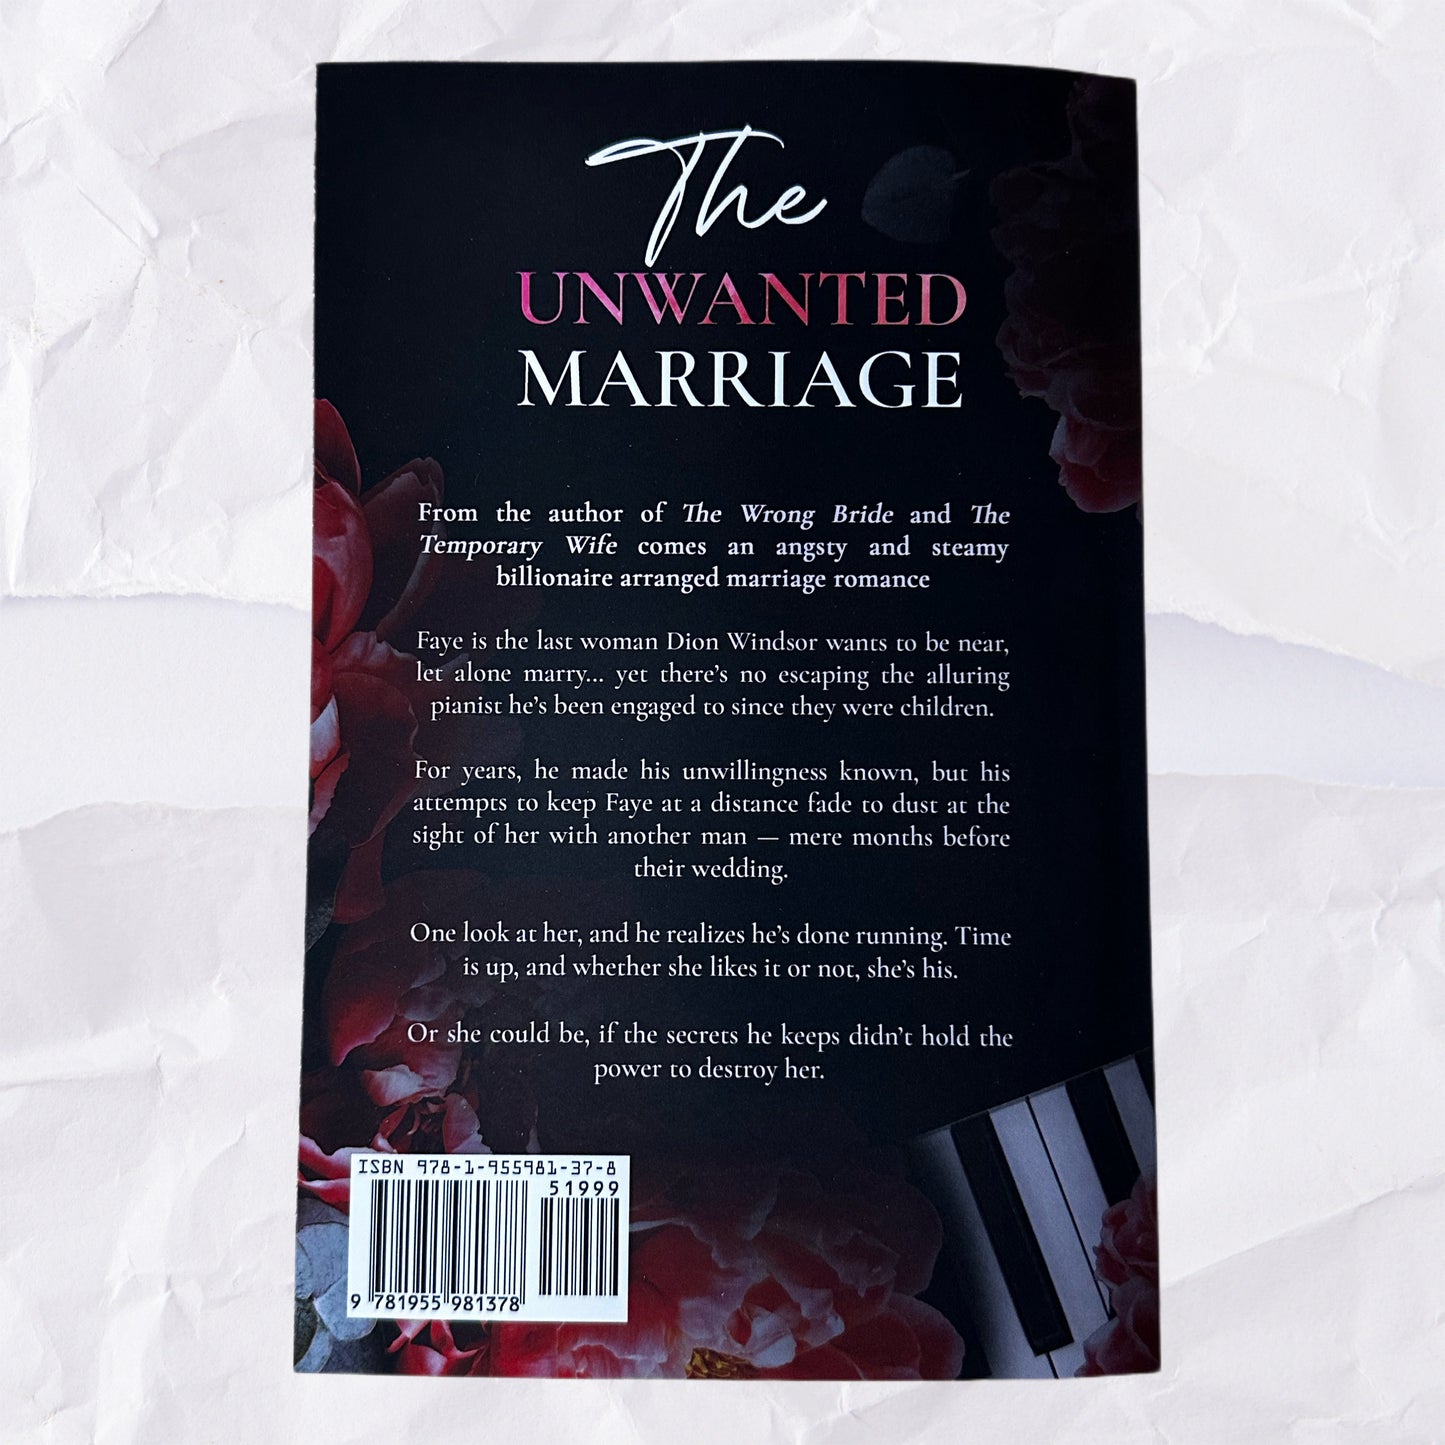 The Unwanted Marriage (The Windsors #3) by Catharina Maura